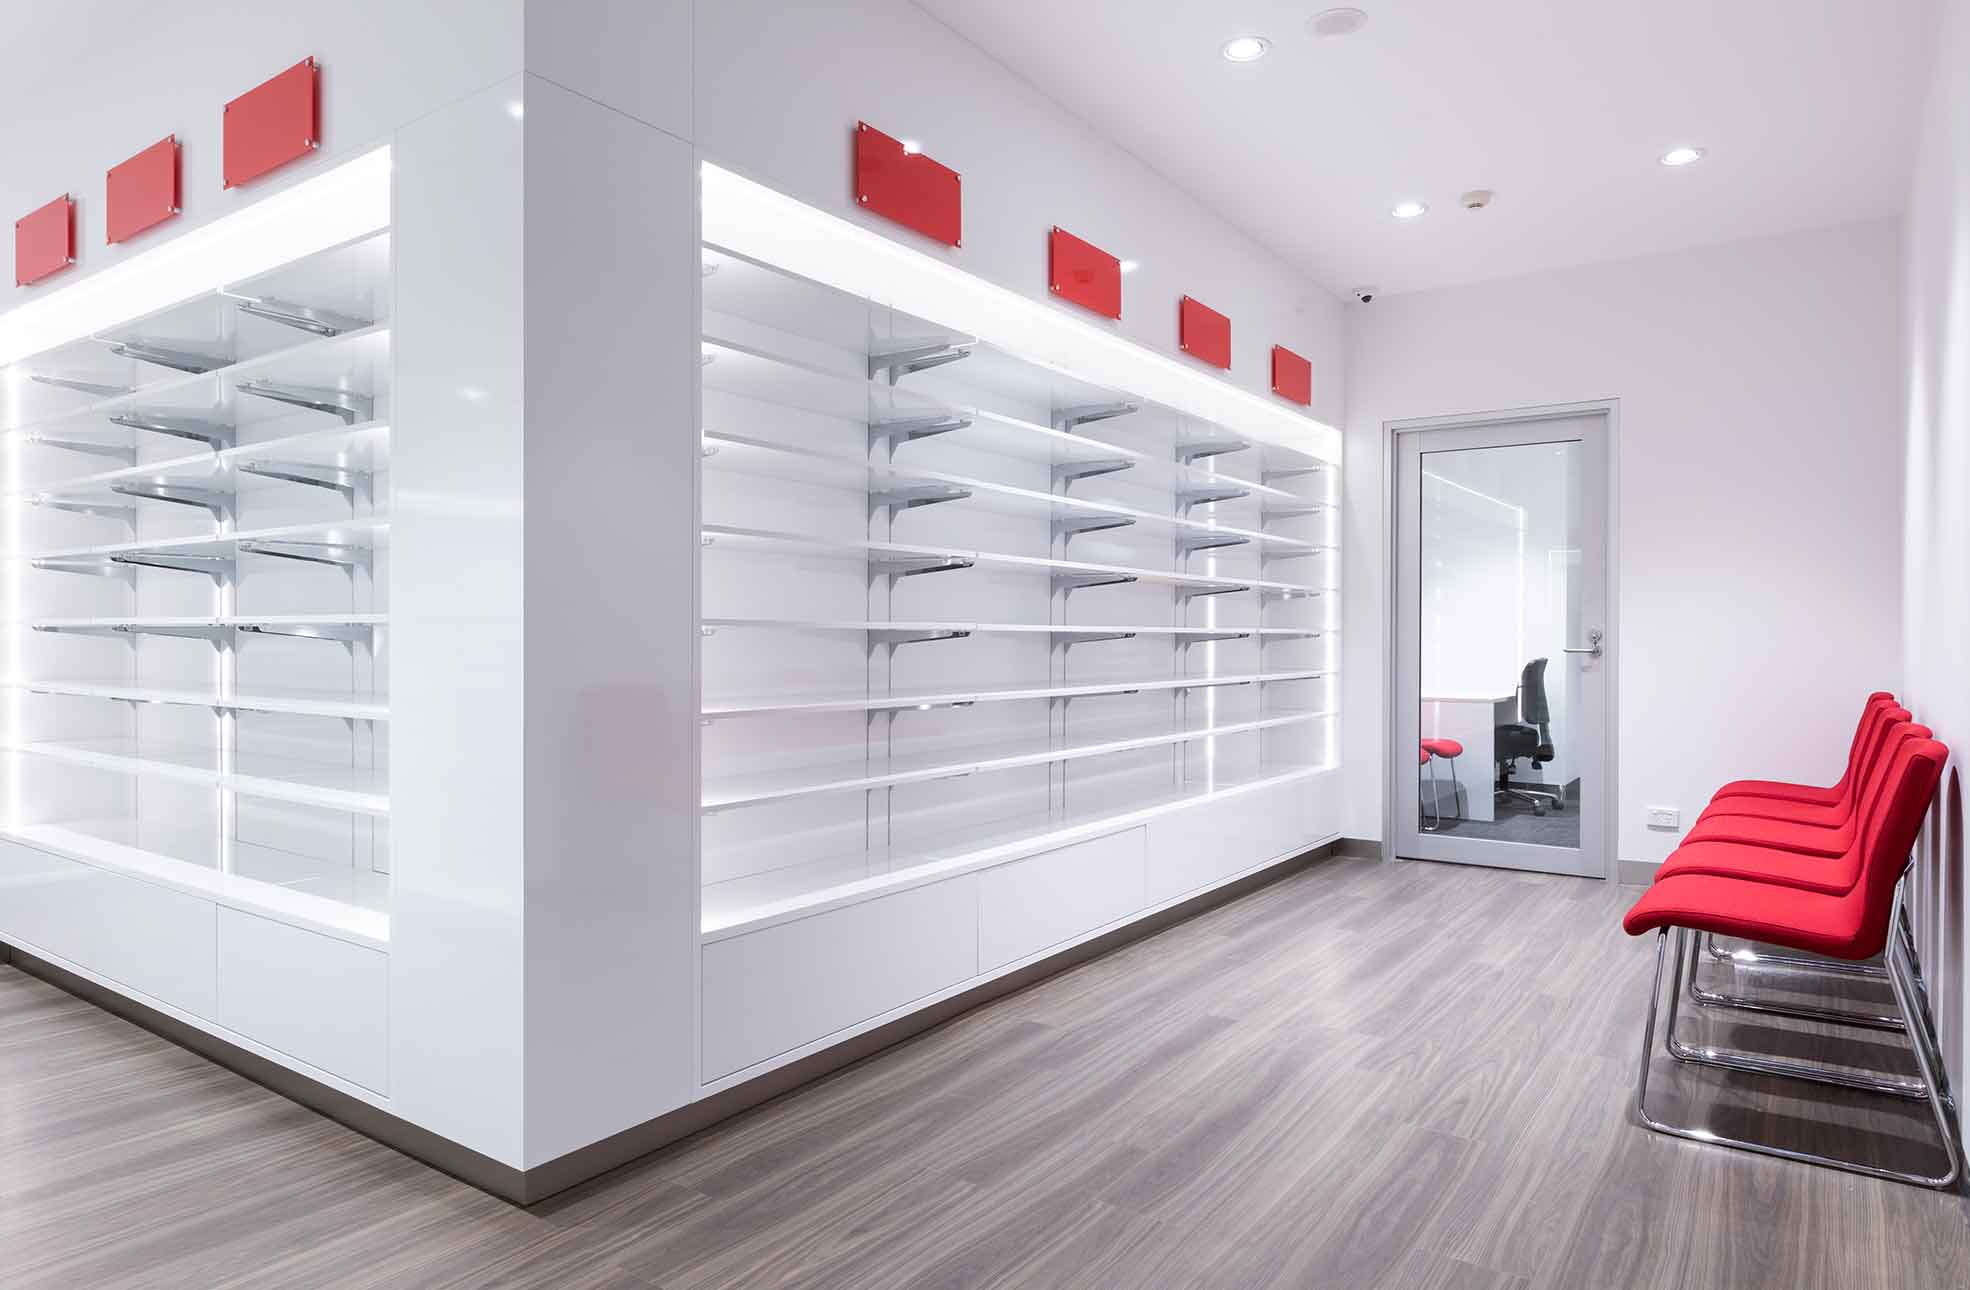 Retail fitout showing rows of white shelving for retial pharmacy